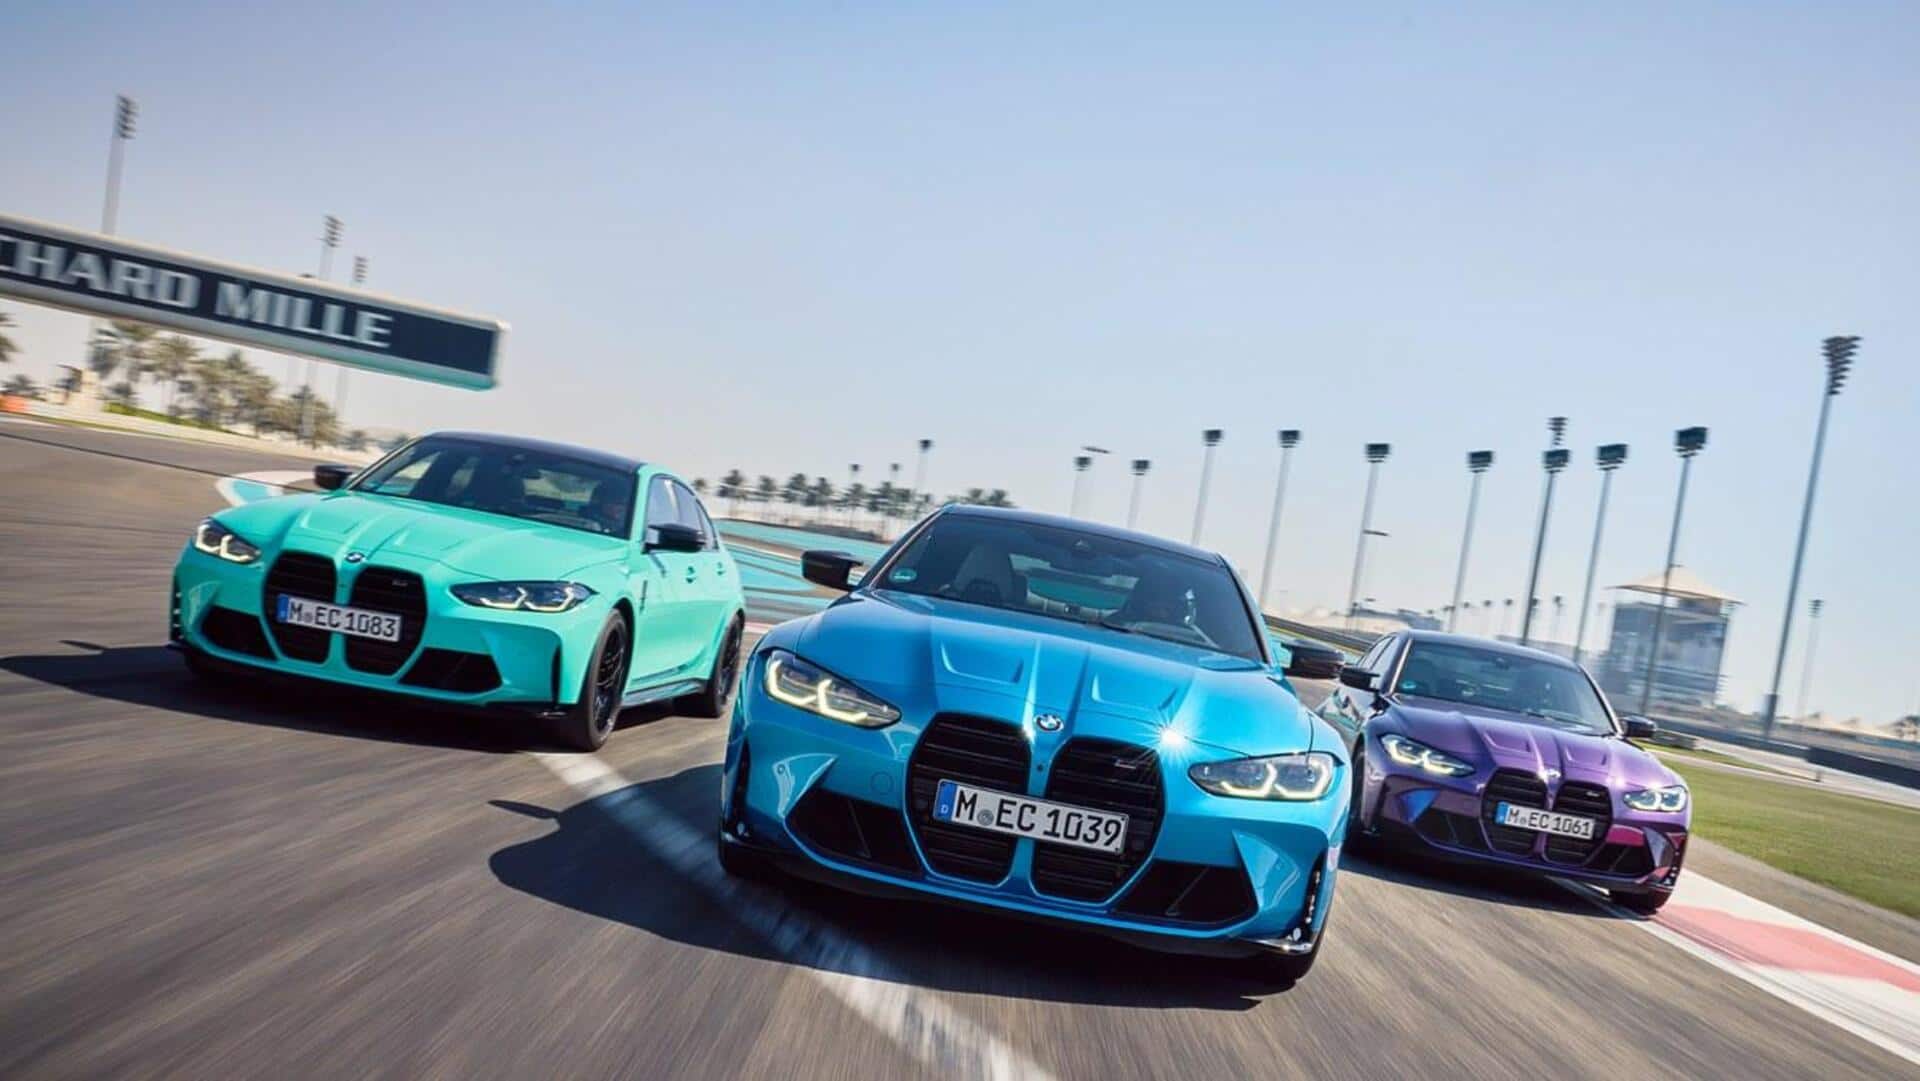 BMW's M cars to continue using inline-six, V8 engines